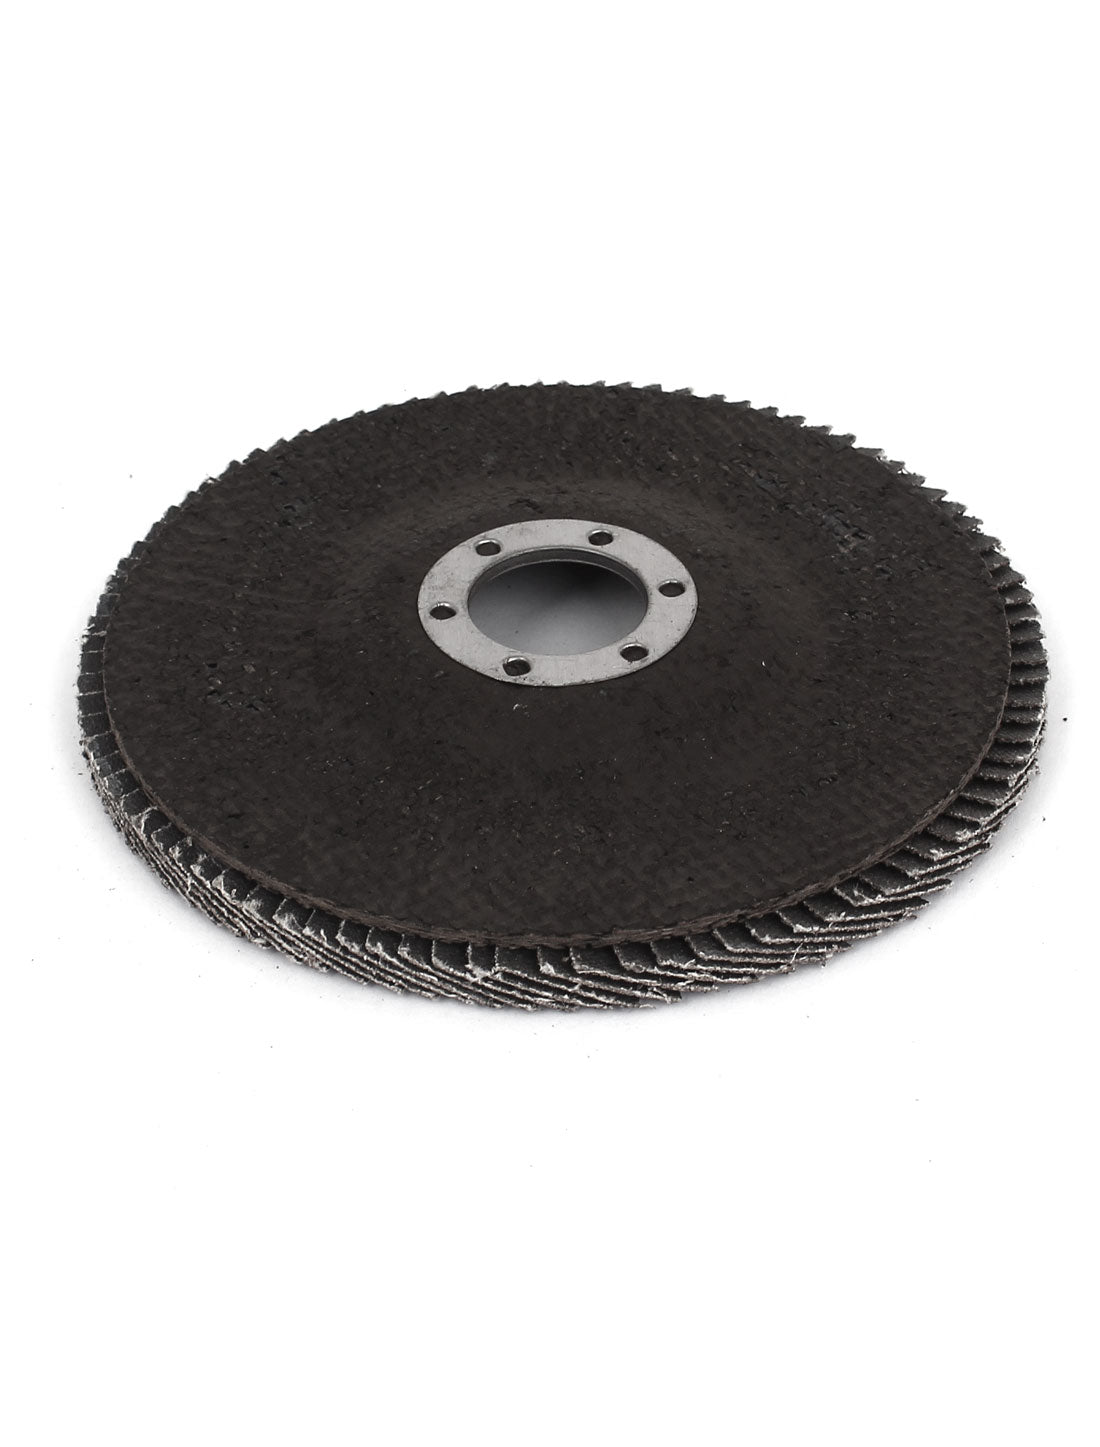 uxcell Uxcell 125mm 5" Dia 22mm Bore 60 Grit Flap Sanding Discs Polishing Buffing Wheels